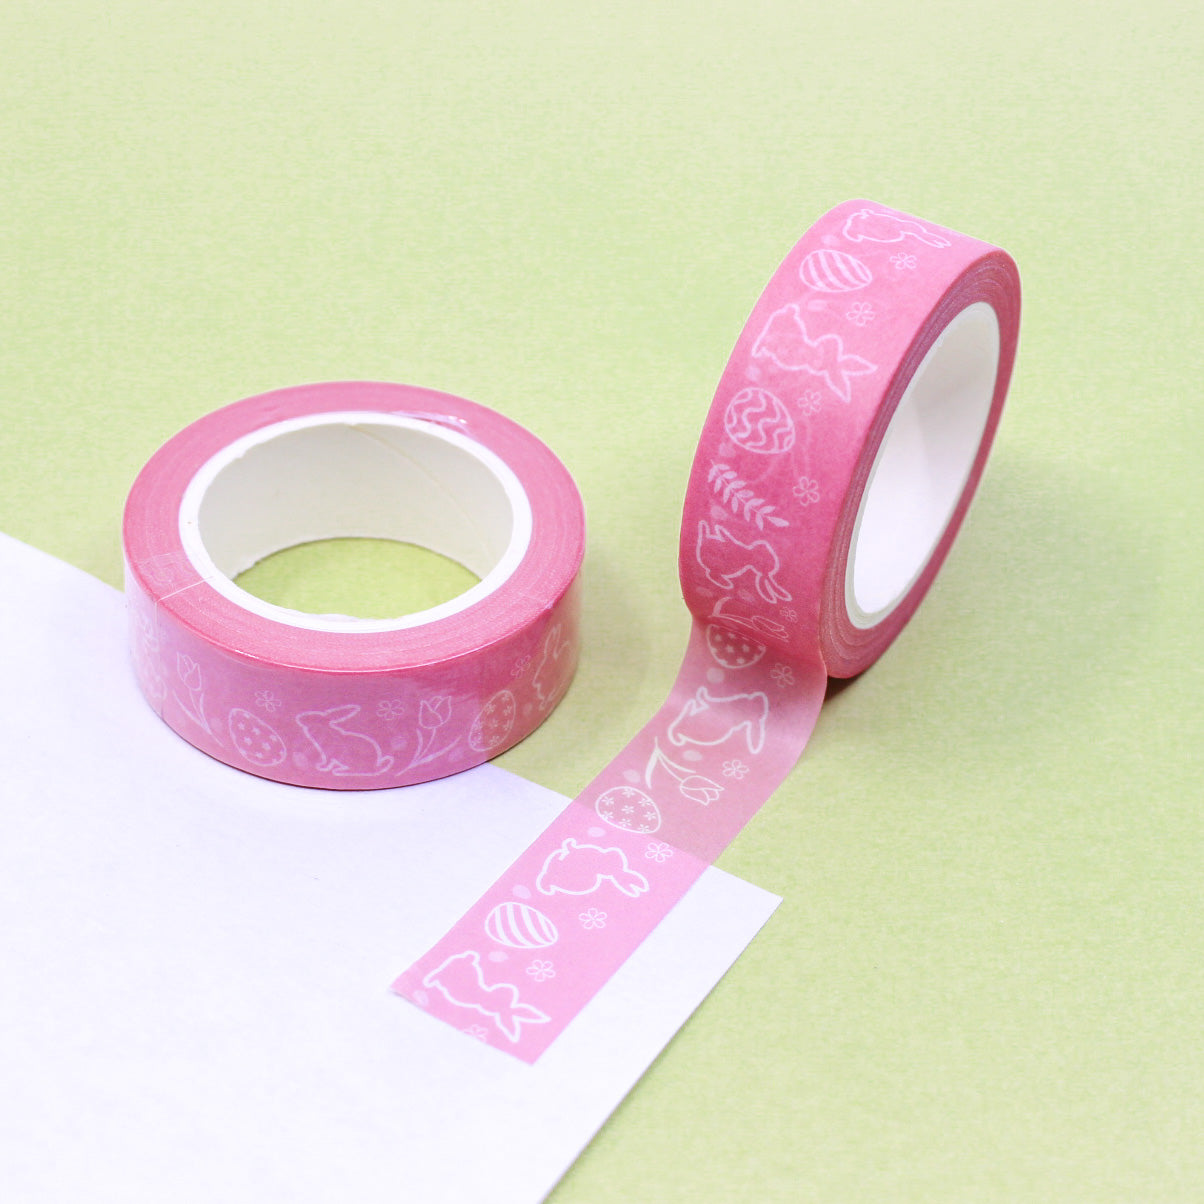 This charming tape features playful bunnies and colorful Easter eggs on a pink background, adding a delightful touch to your Easter crafts and decorations. Perfect for scrapbooking, card-making, and other creative projects. This tape is sold at BBB Supplies Craft Shop.